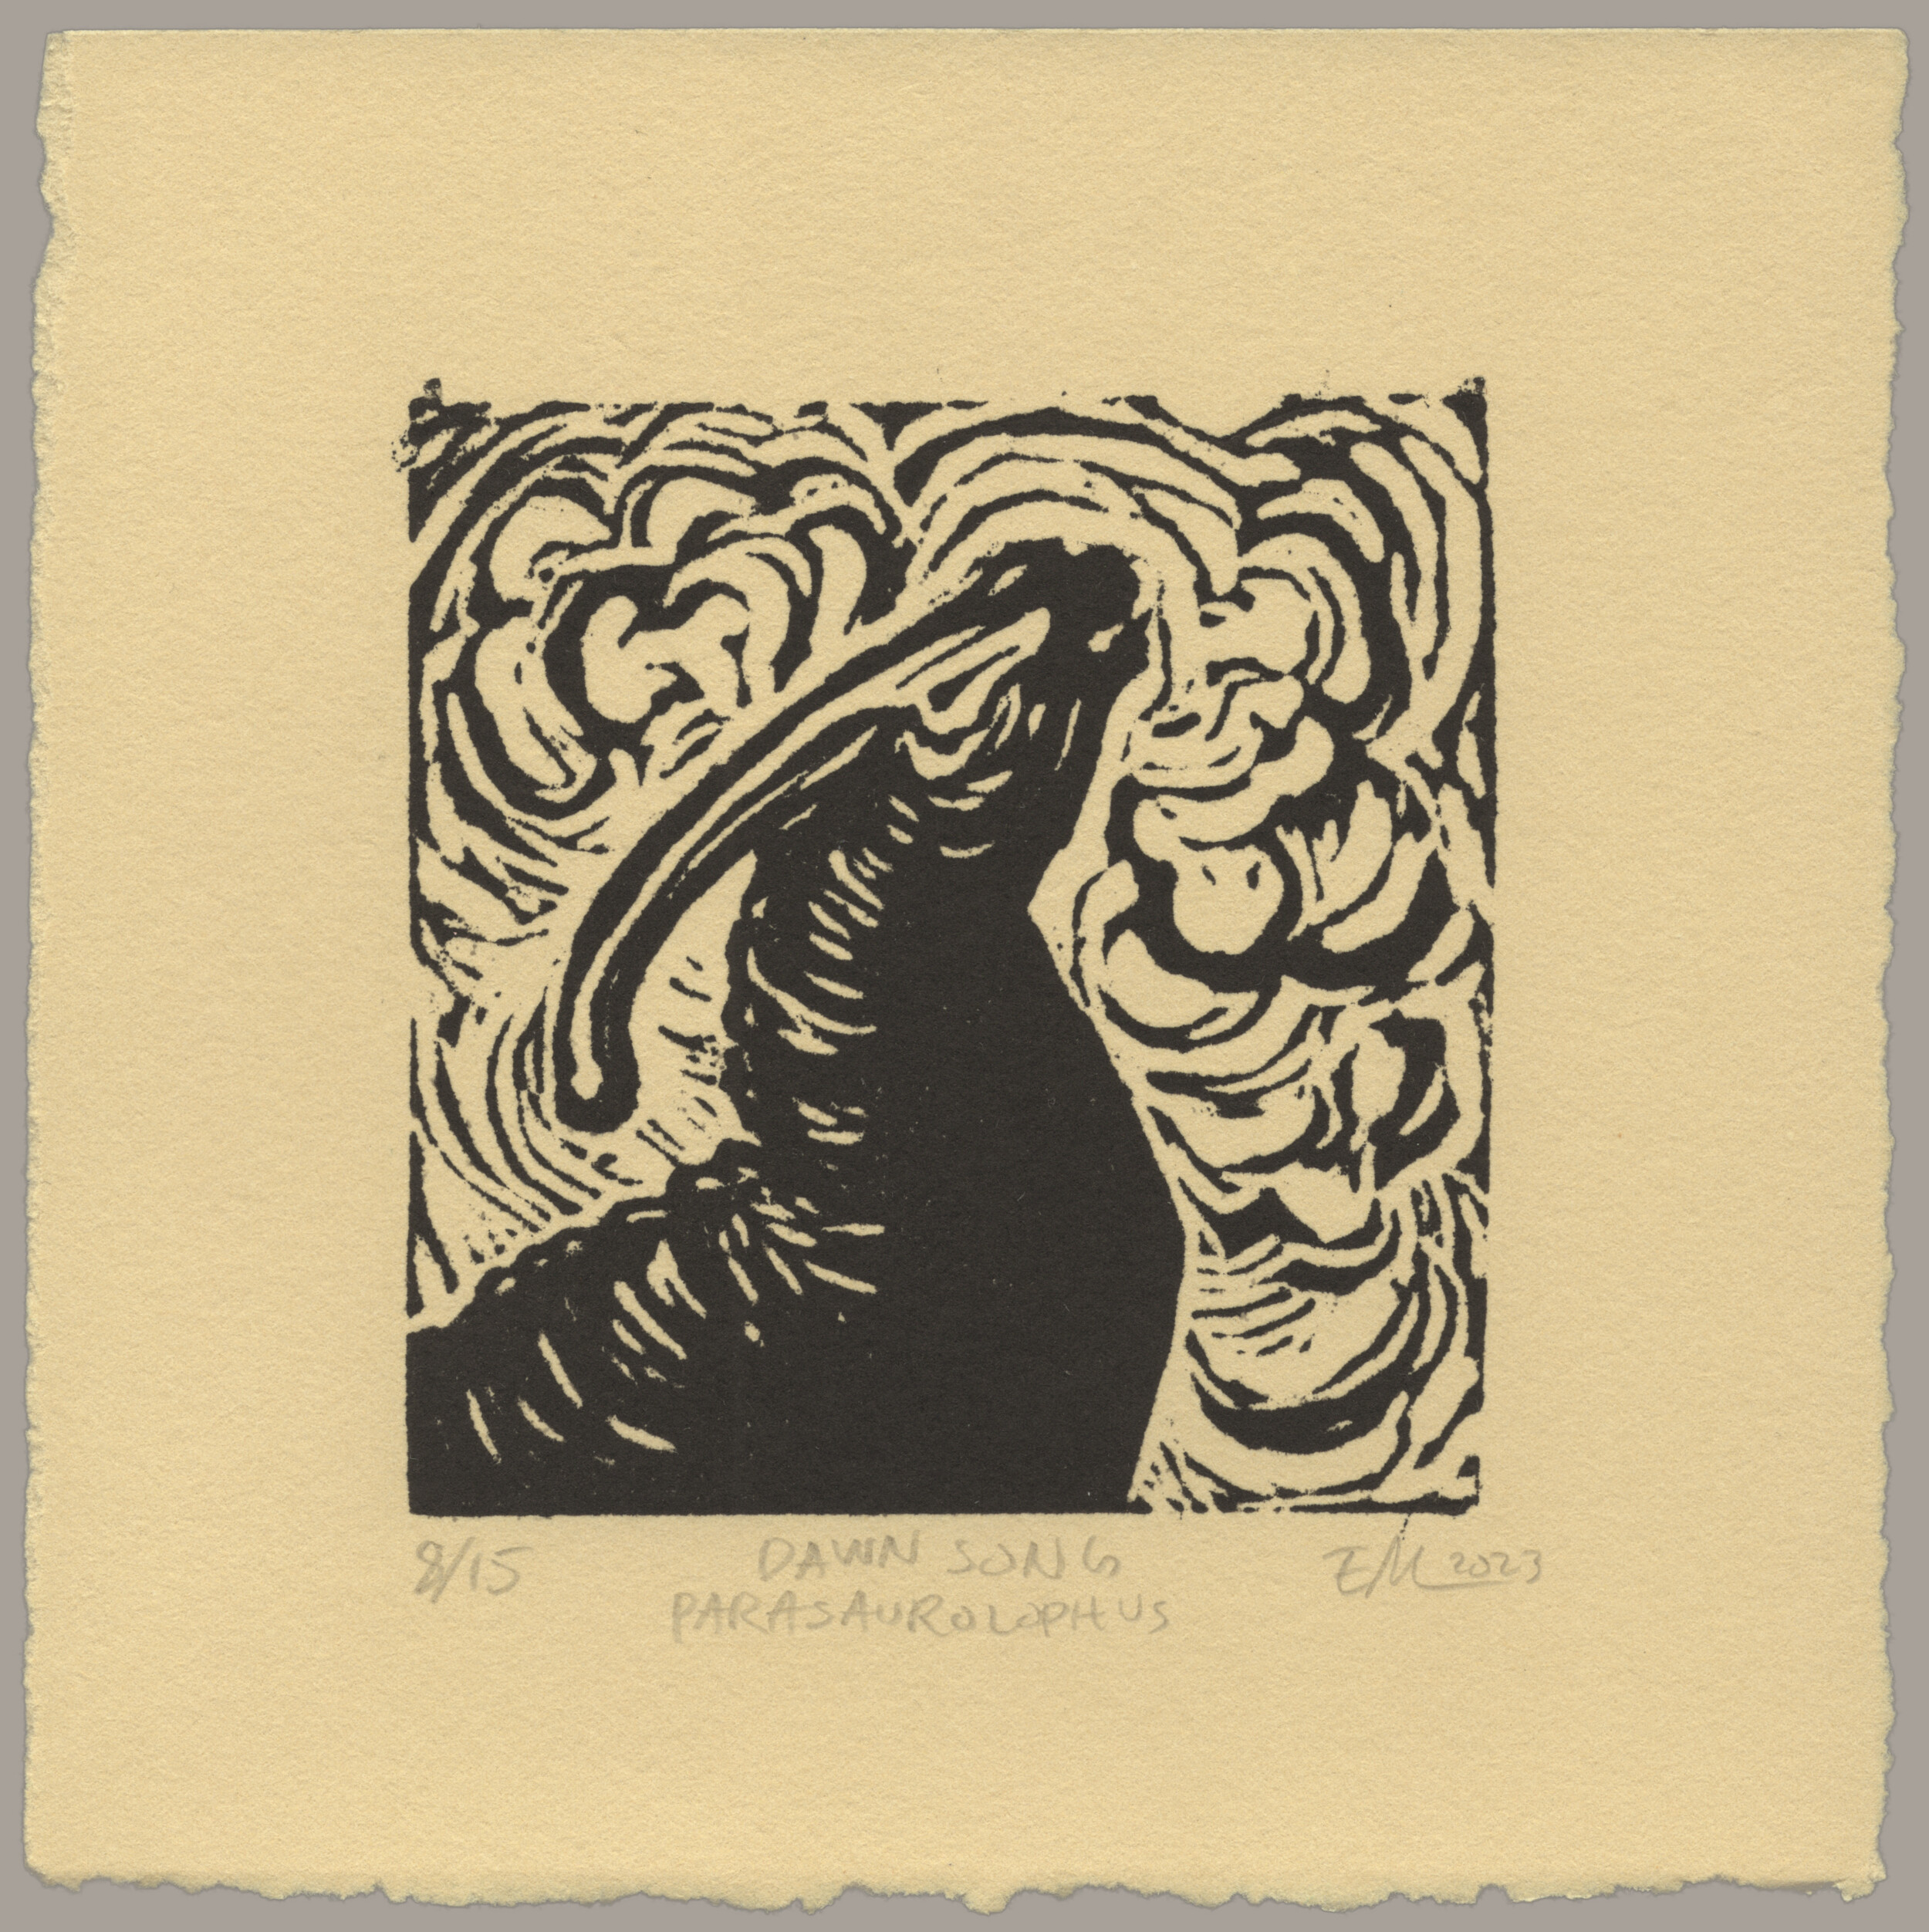 A black linocut print on warm, sand-colored paper showing a bust of a dinosaur with a long head crest extending backwards from its face and curving slightly over its neck. The dinosaur is lifting its head and calling with billows of fog surrounding it and the sun gently reflecting on its back. The print is signed '8 of 15, Dawn Song (Parasaurolophus), EM 2023'